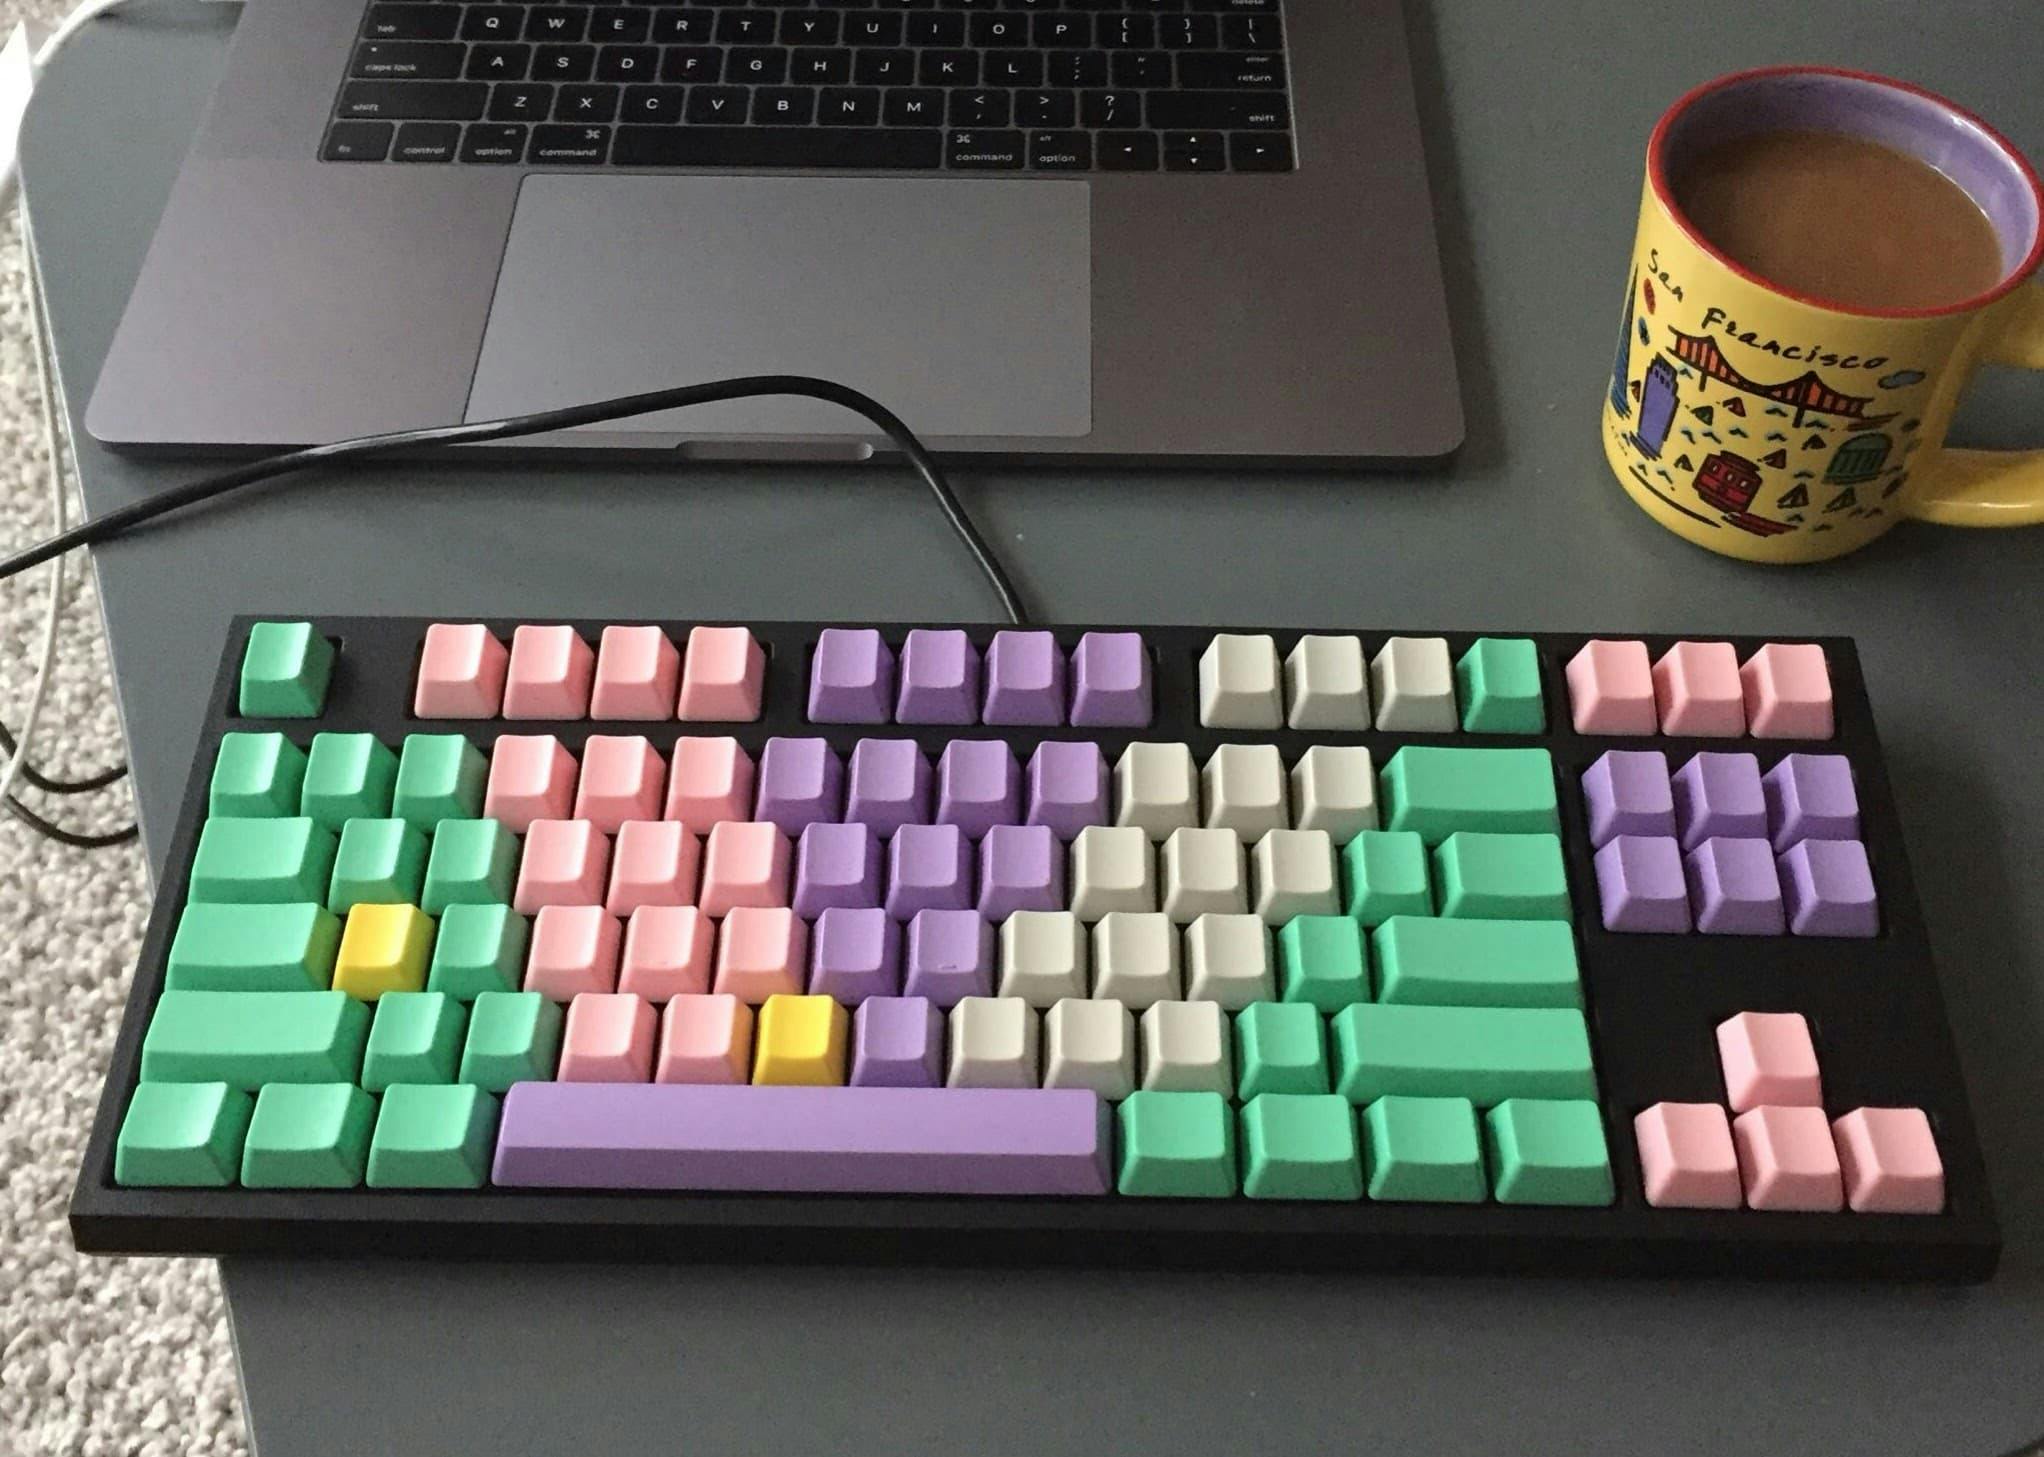 My first mechanical keyboard: WASD 87-key with Cherry MX Brown switches and seafoam green, pink, purple, grey and yellow keycaps